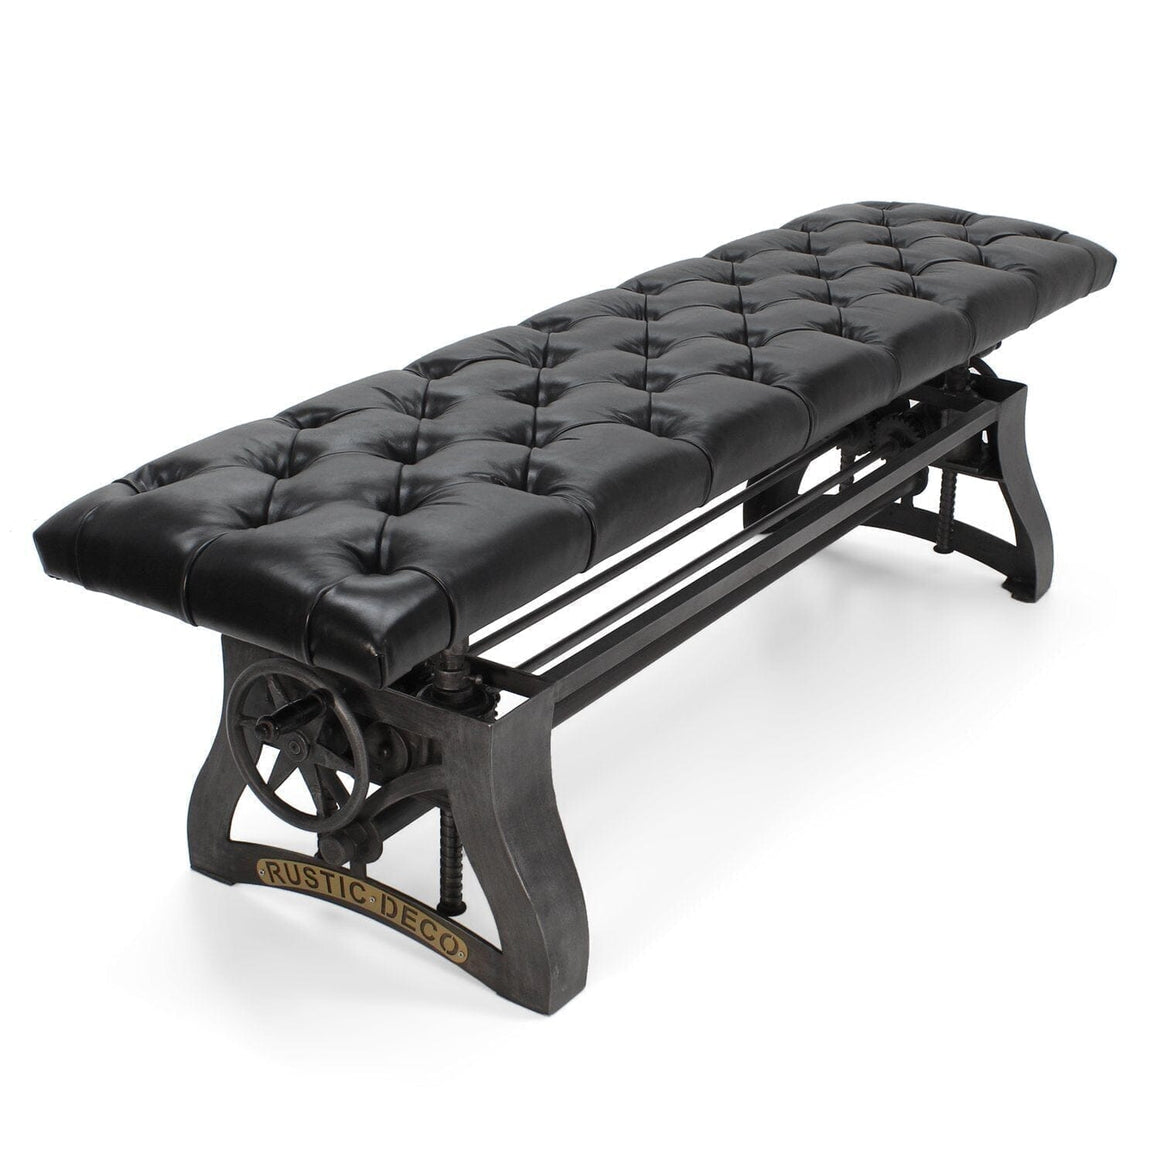 Crescent Industrial Dining Bench - Adjustable Iron Base - Black Leather Seat - Rustic Deco Incorporated